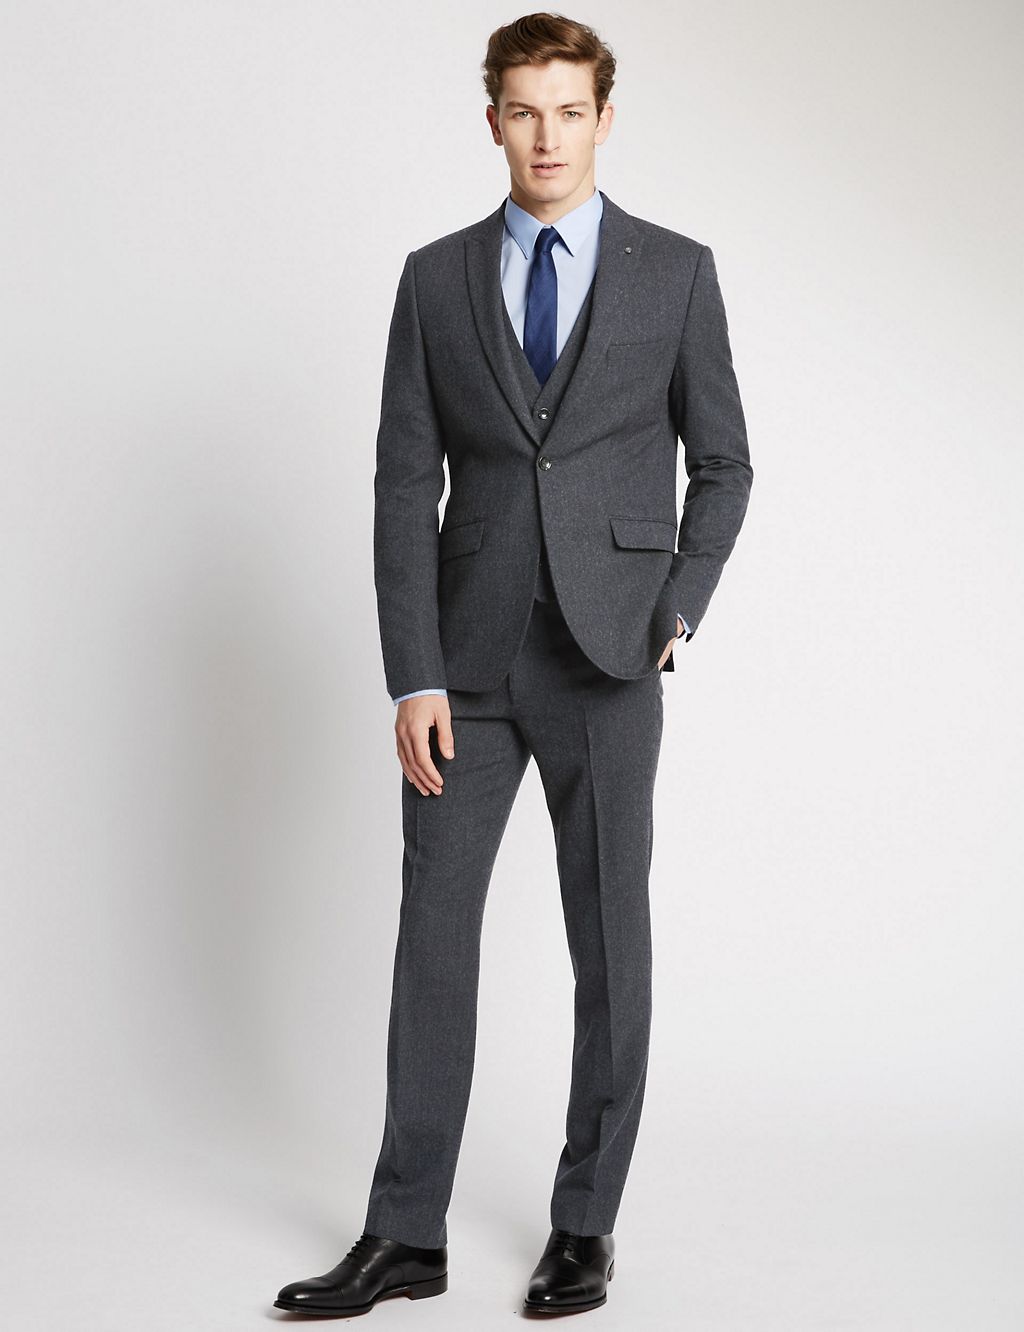 Navy Textured Modern Tailored Fit Jacket 3 of 8